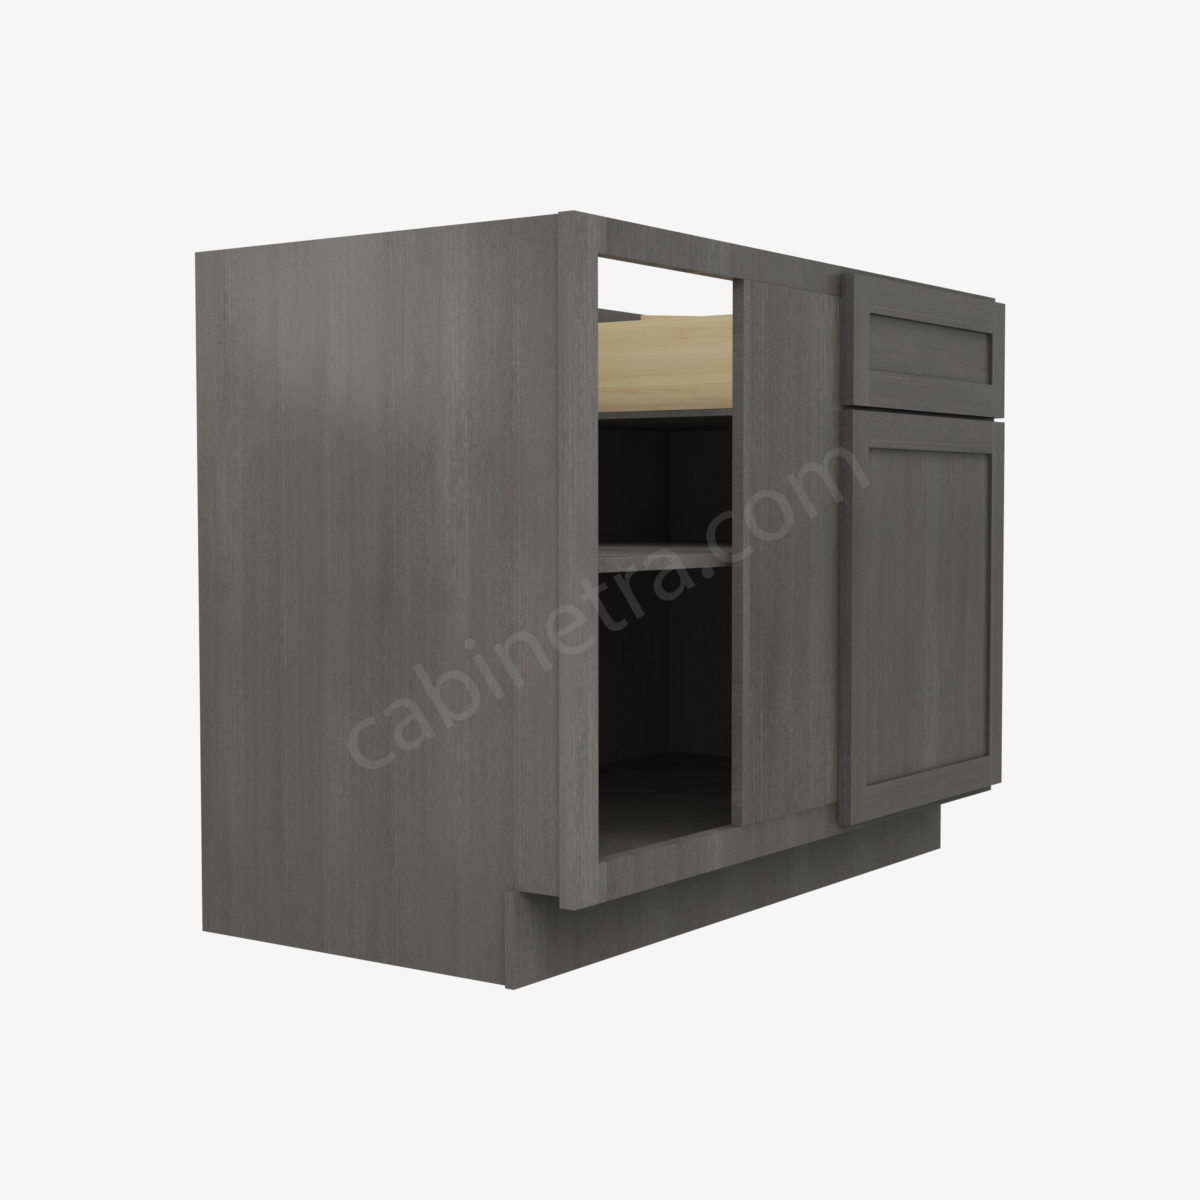 AG BBLC45 48 42W 4 Forevermark Greystone Shaker Cabinetra scaled